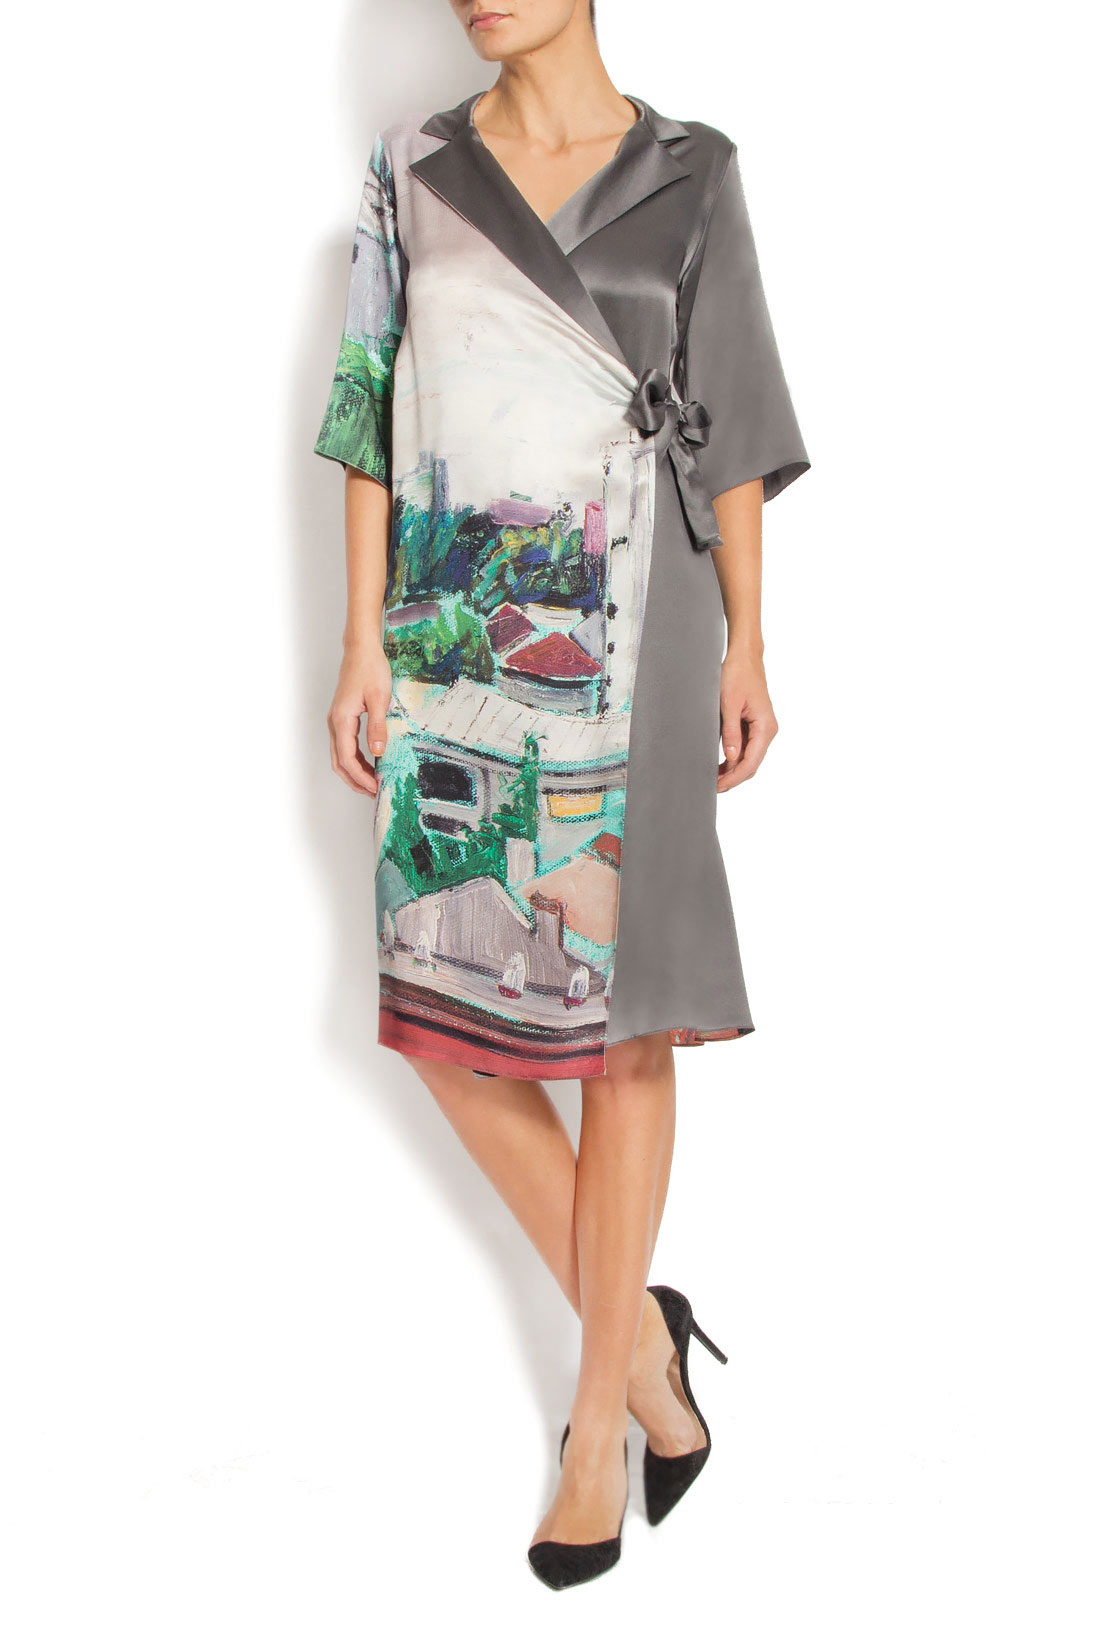 'Eclipsed City' printed silk wrap dress Argo by Andreea Buga image 0